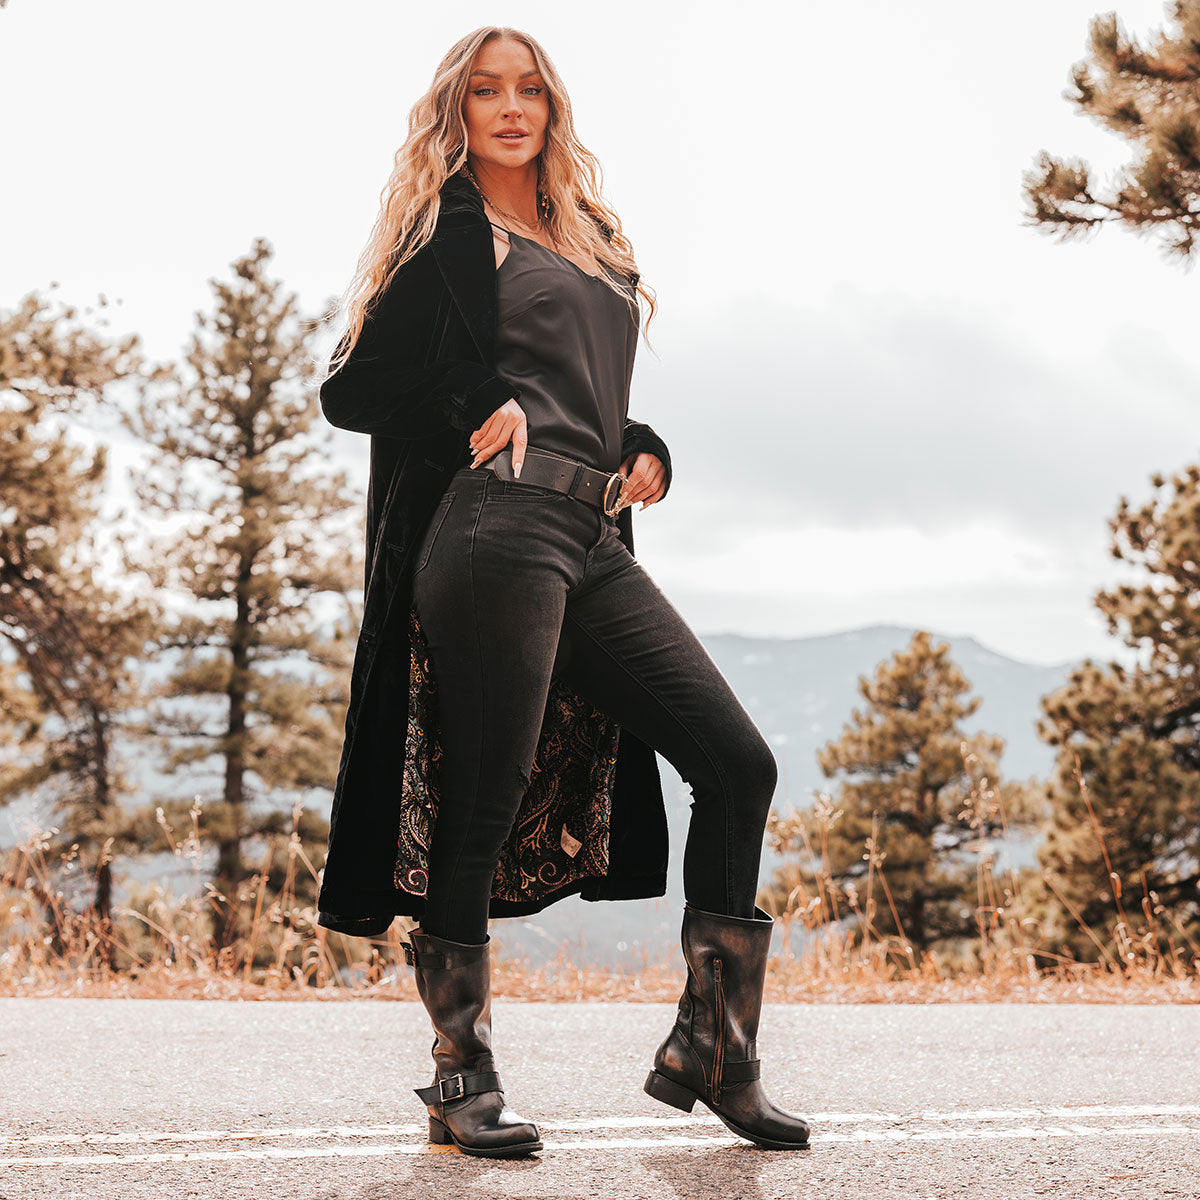 FREEBIRD women's Rip black leather boot with functioning buck straps, a working brass inside zipper and a low block heel lifestyle